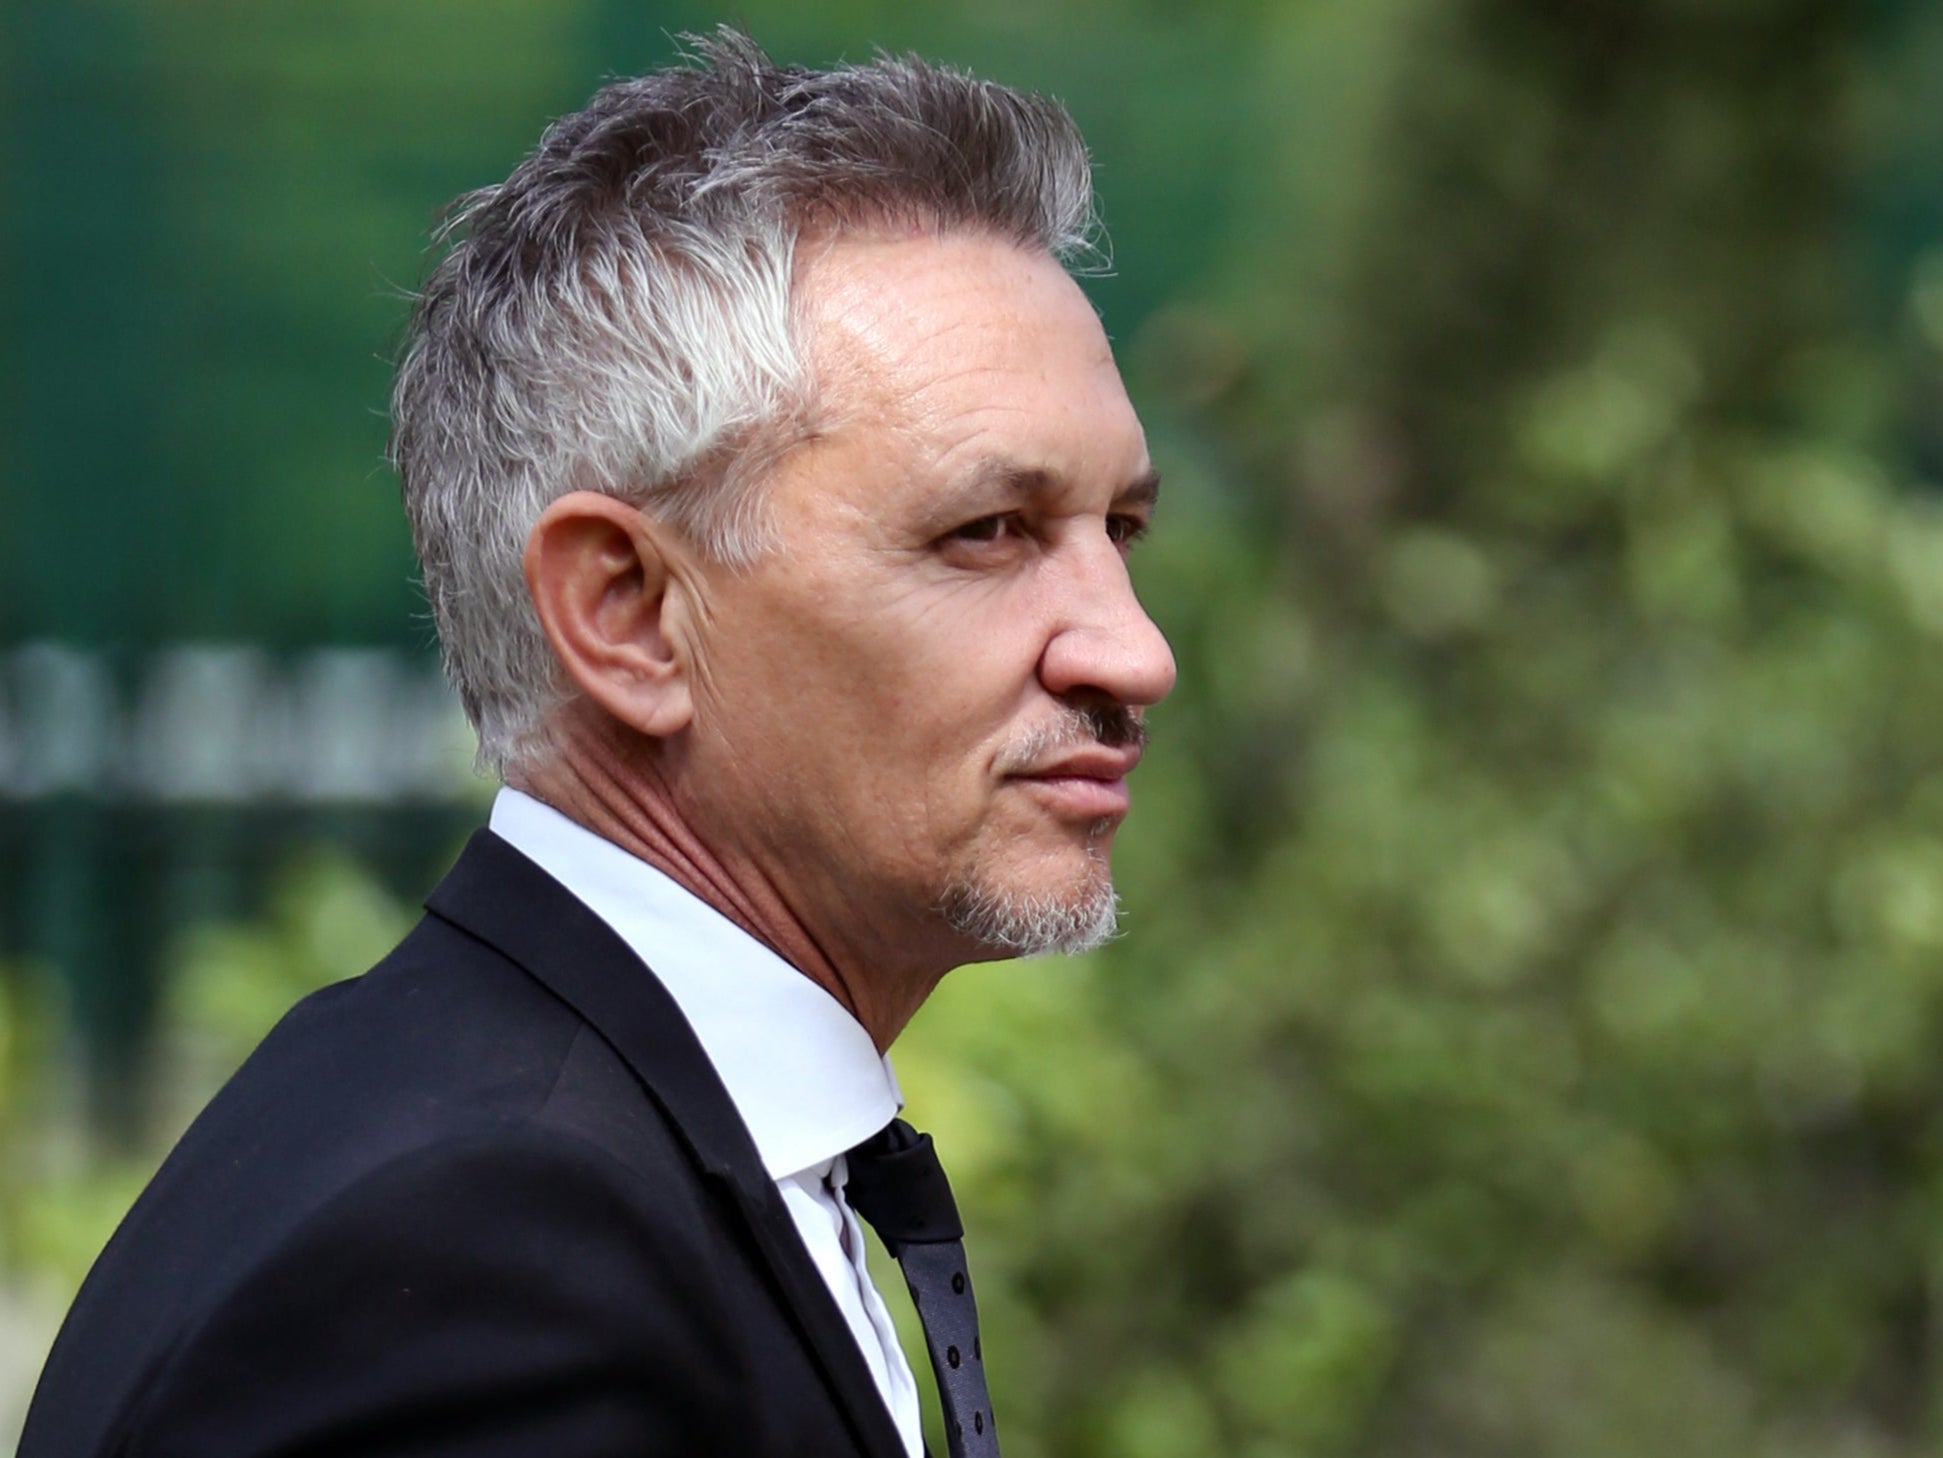 Gary Lineker earns a salary of £1.75m and is the BBC's best-paid star.